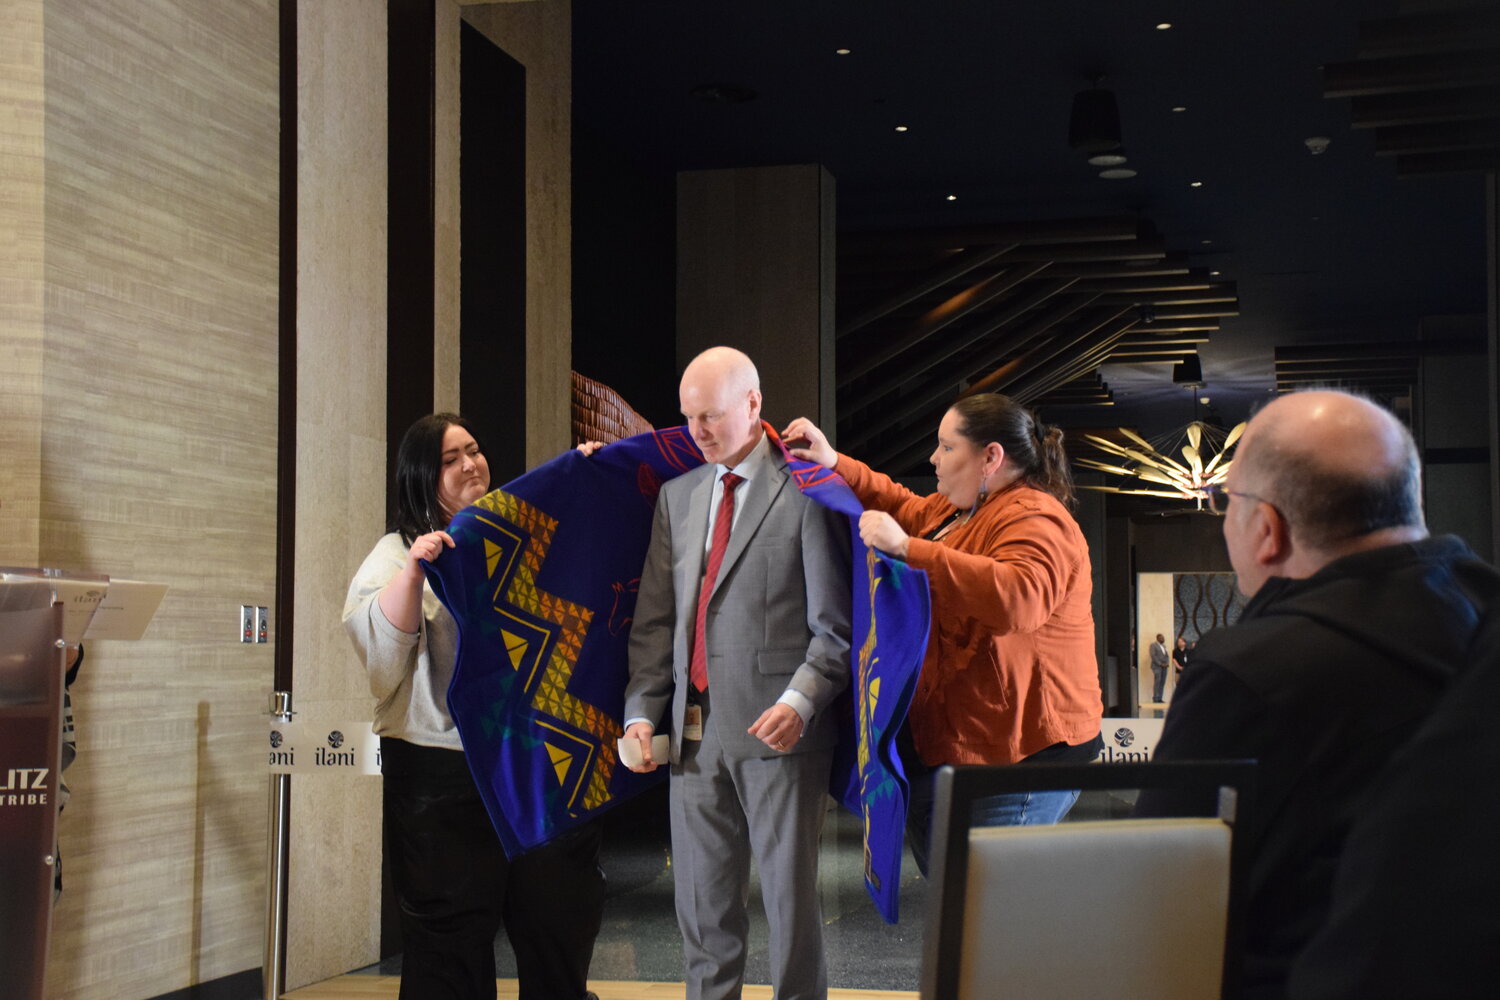 Mohegan Sun Director of Program Management Paul Tresnan receives a blanket from Cowlitz Indian Tribe members ahead of a ribbon cutting for the 14-story hotel at ilani April 24.